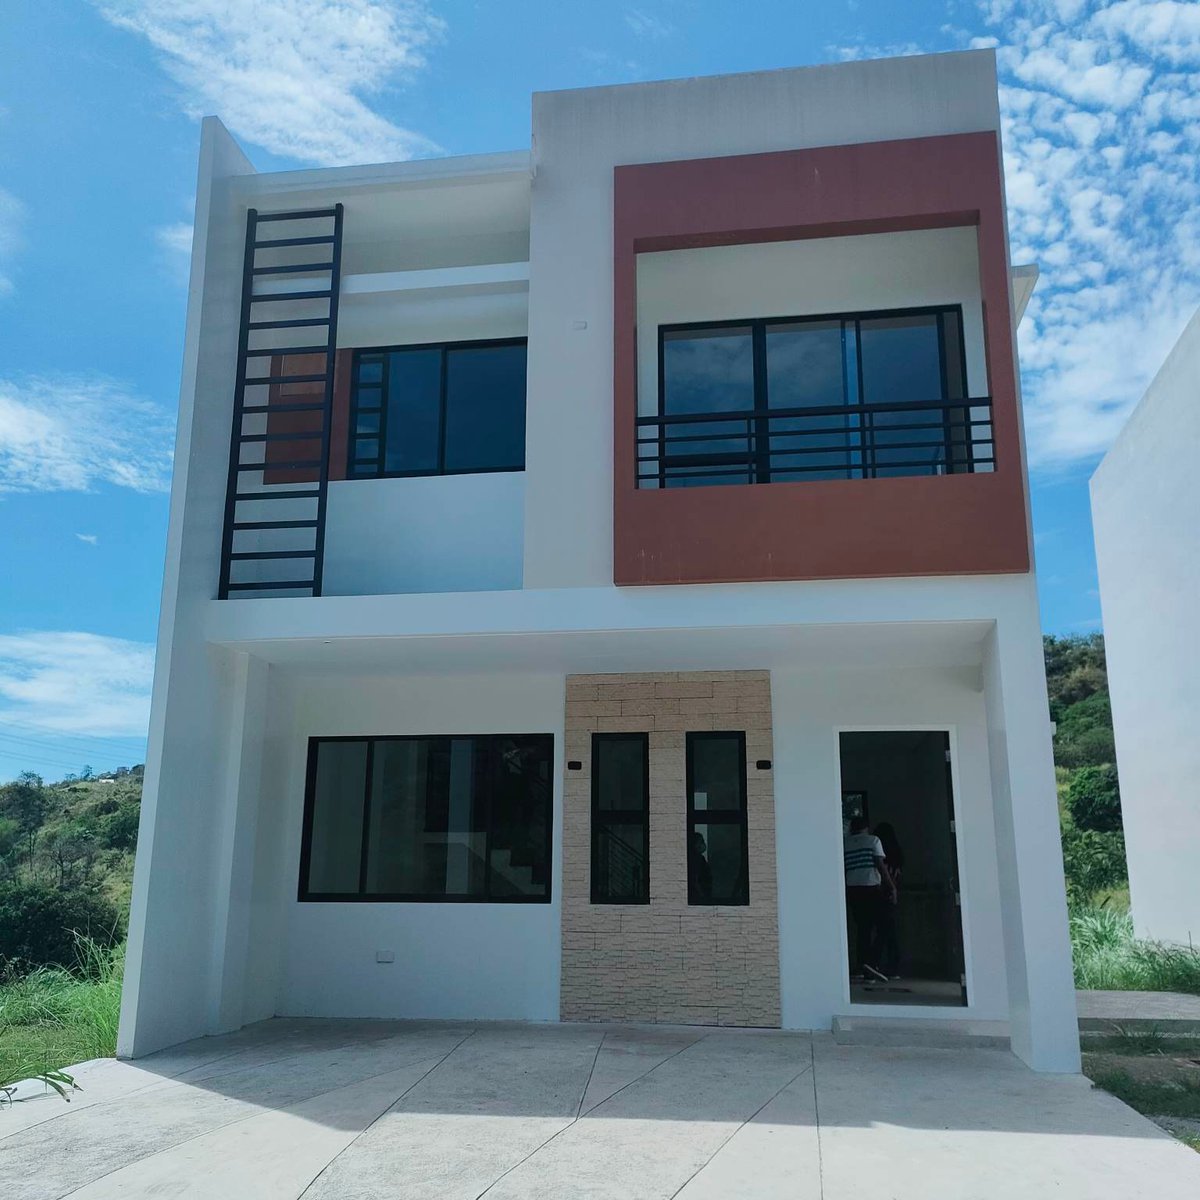 4-bedroom Single Attached House For Sale in Antipolo City